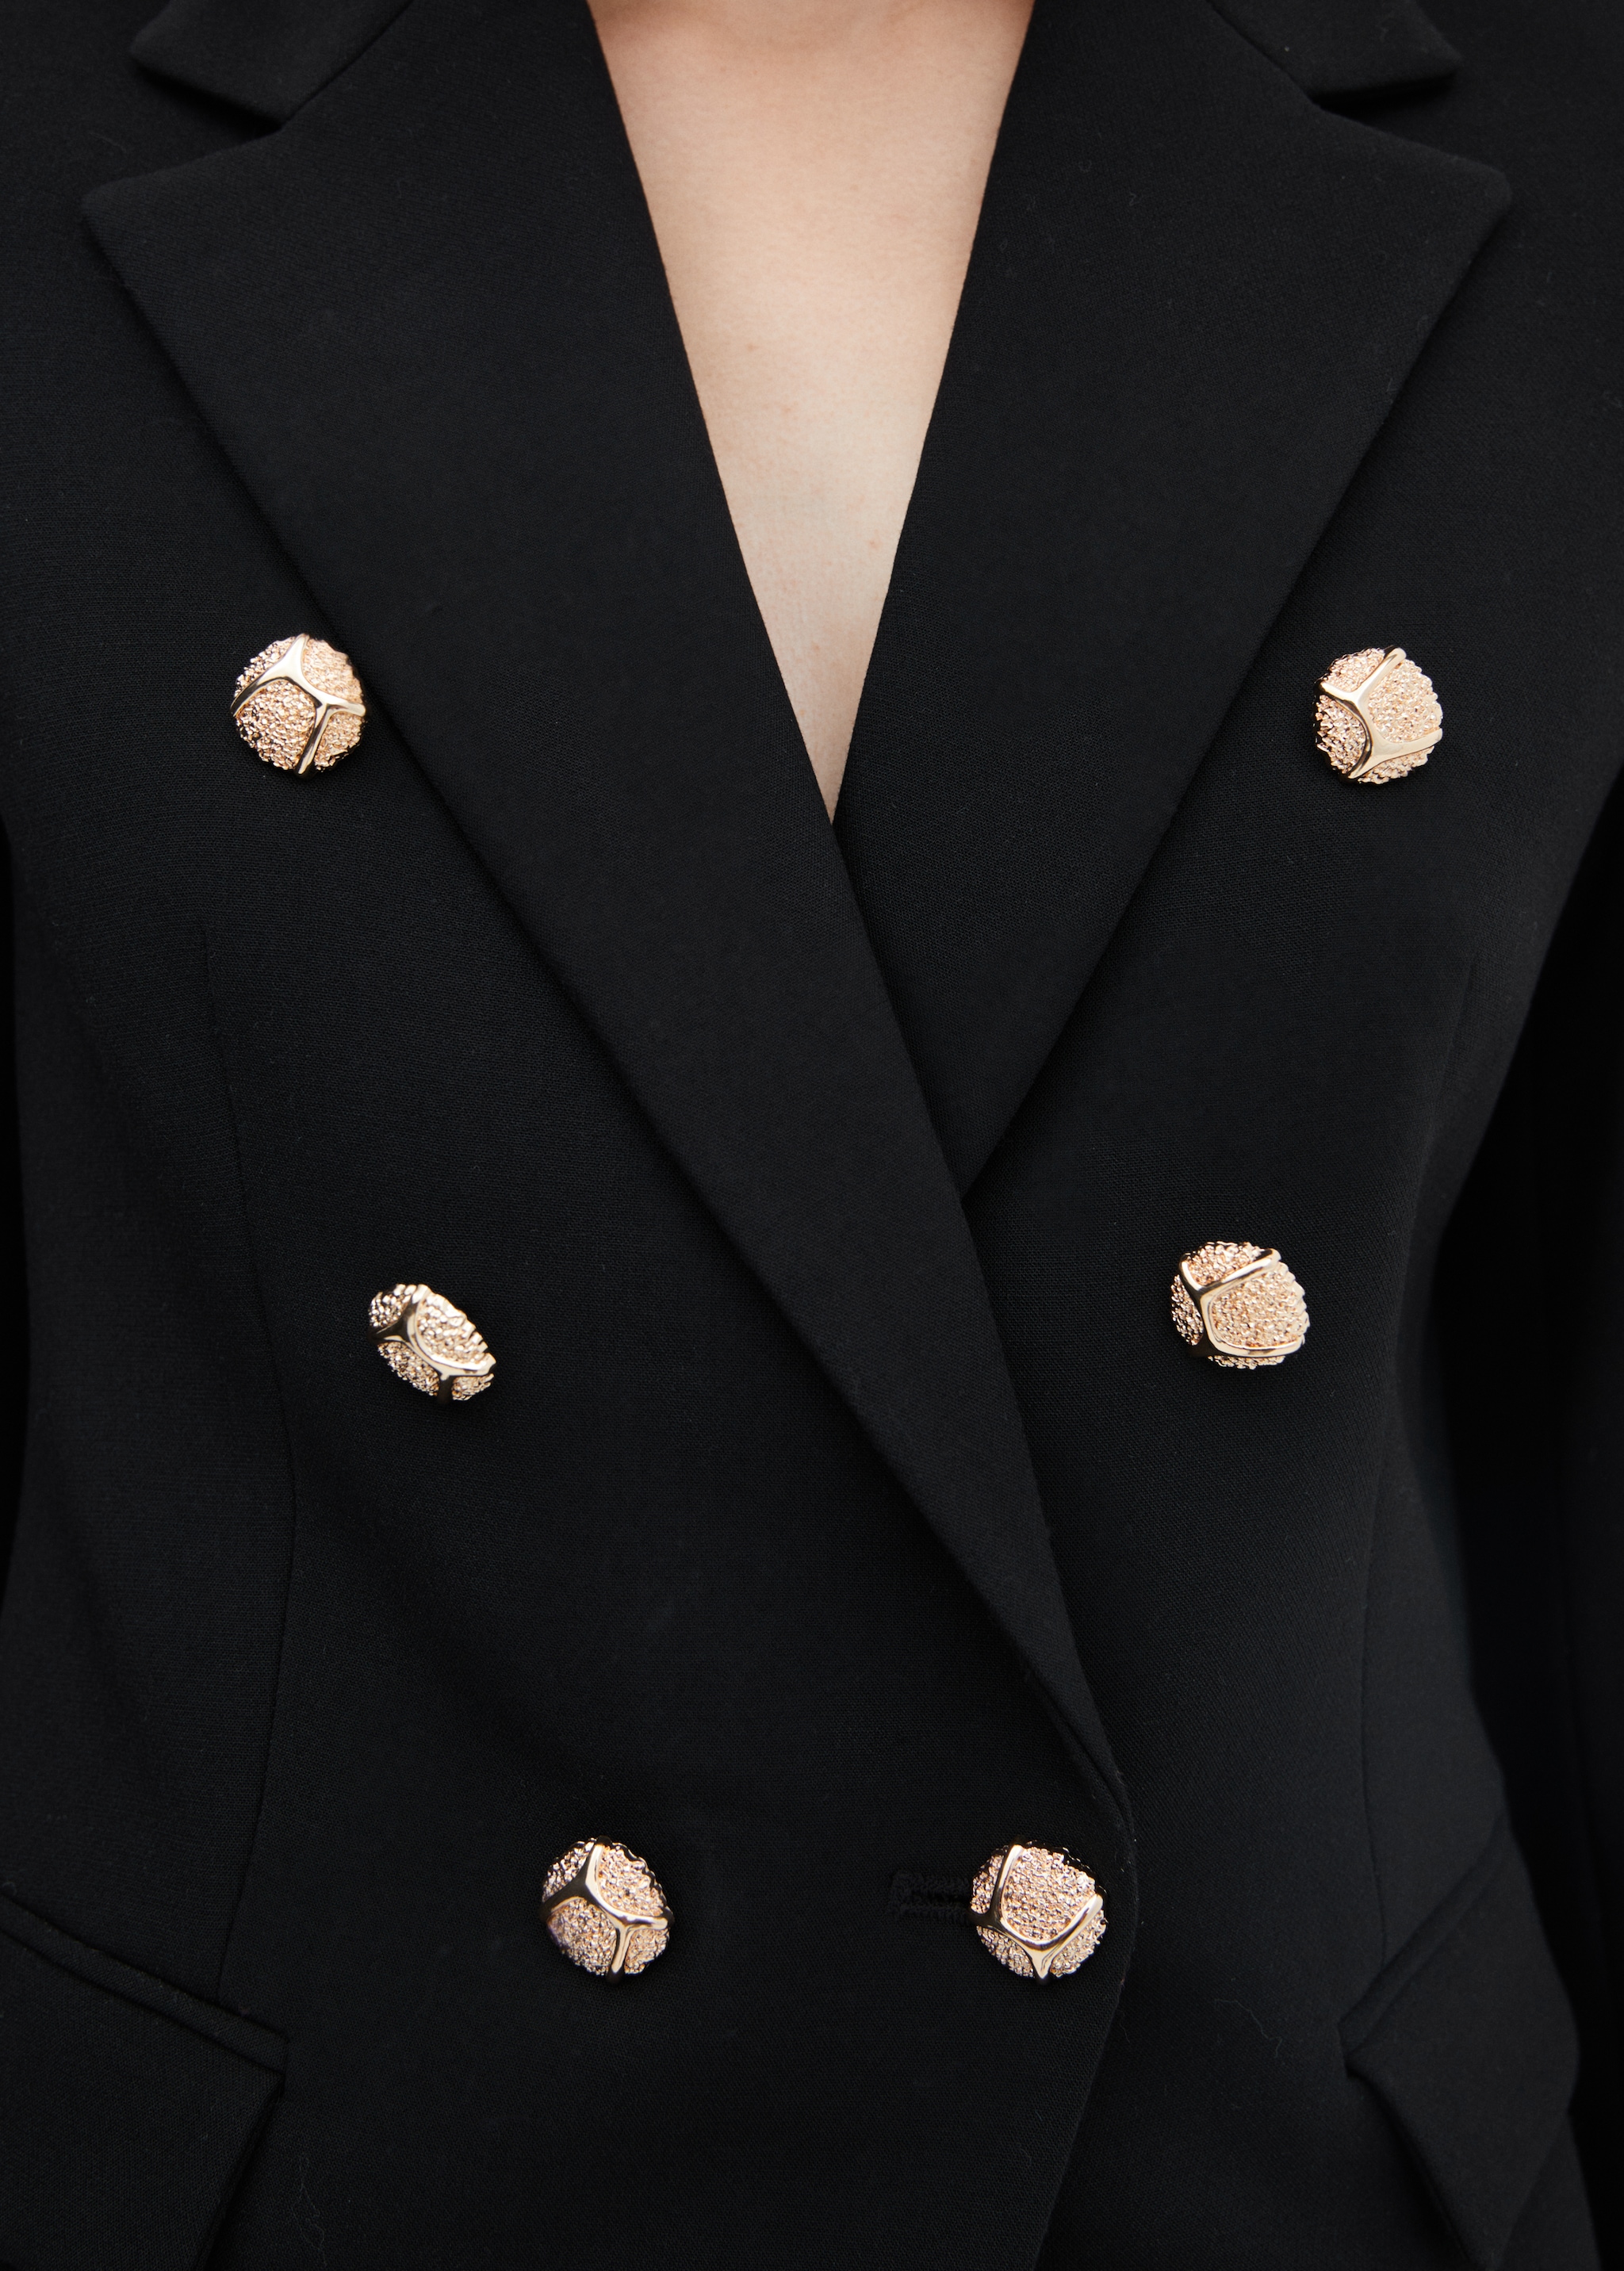 Double-breasted blazer - Details of the article 6